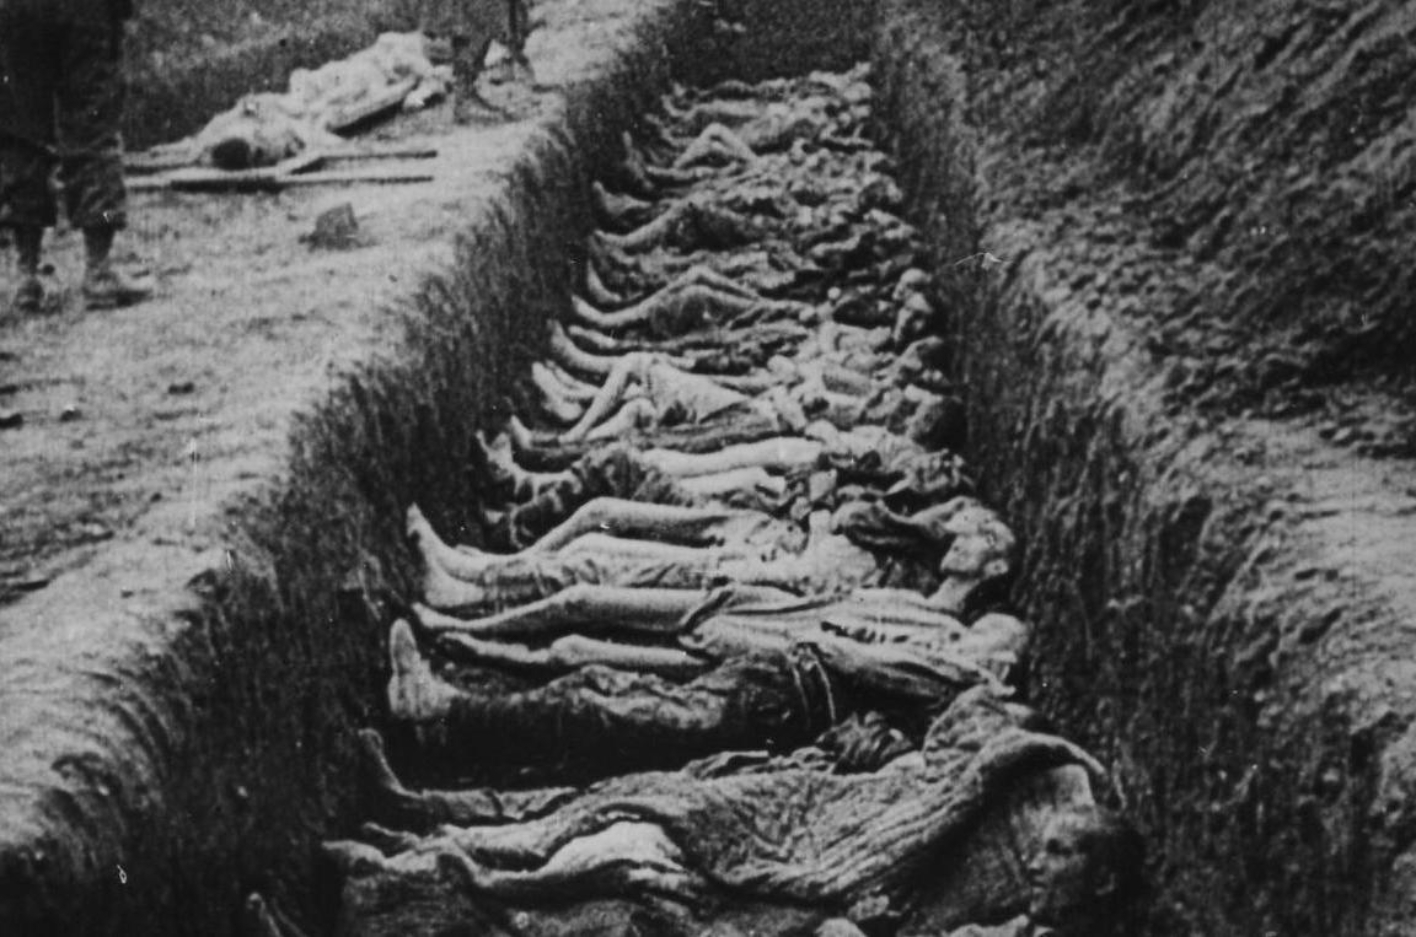 Dead, naked bodies in a trench-like mass grave.